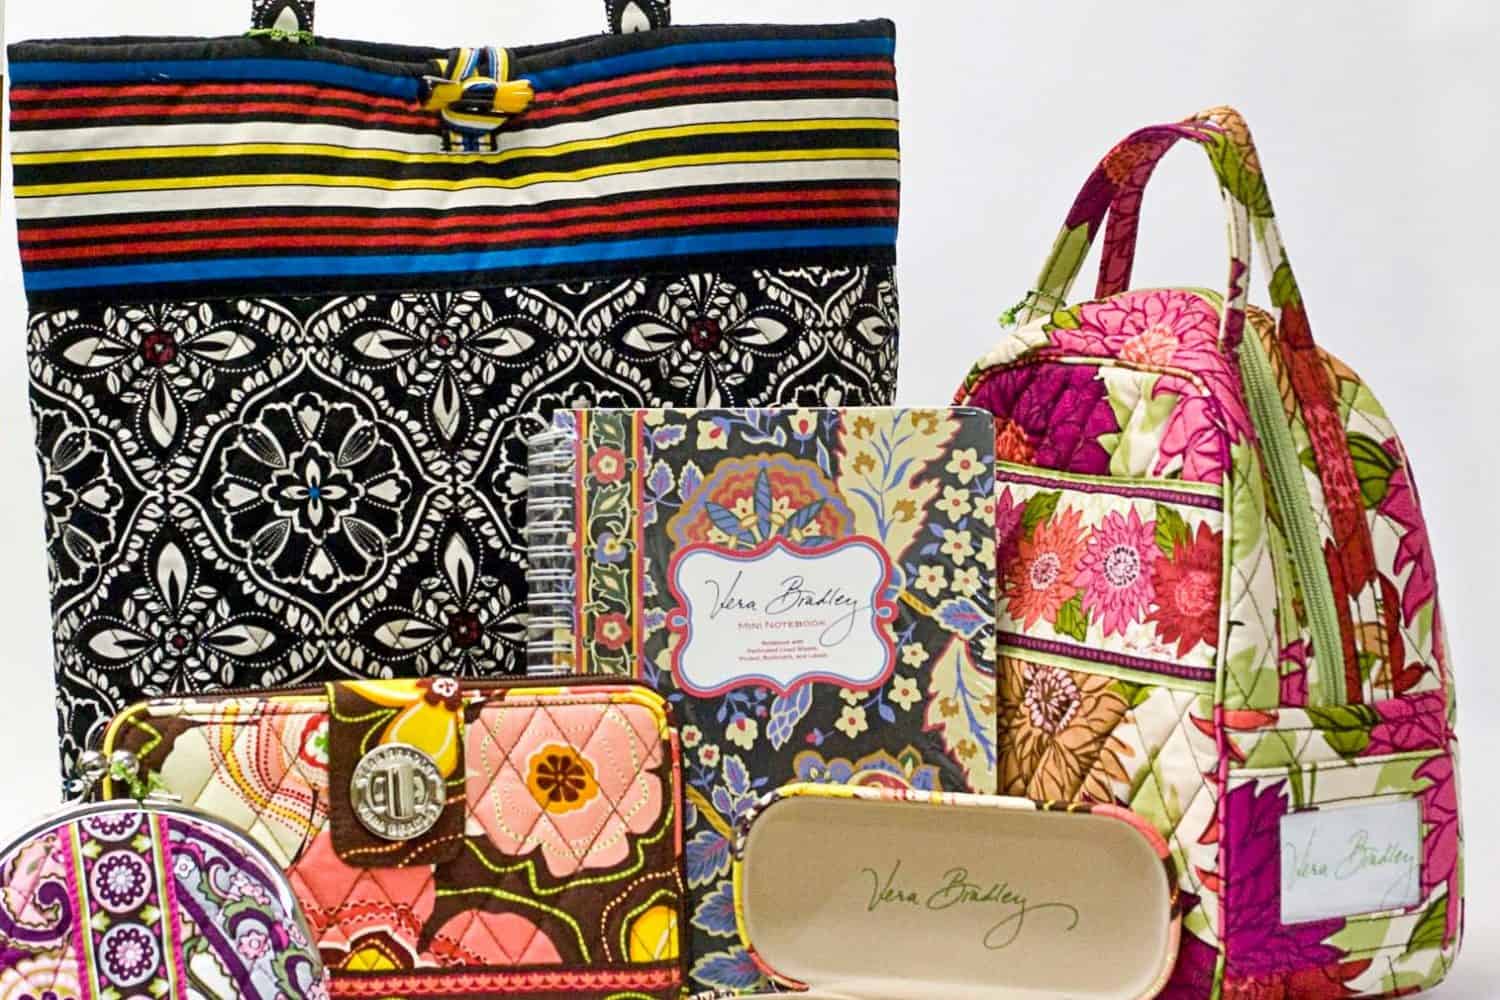 Vera Bradley Outlet Overnight - Bus Trip - Low Price - % Departing ...